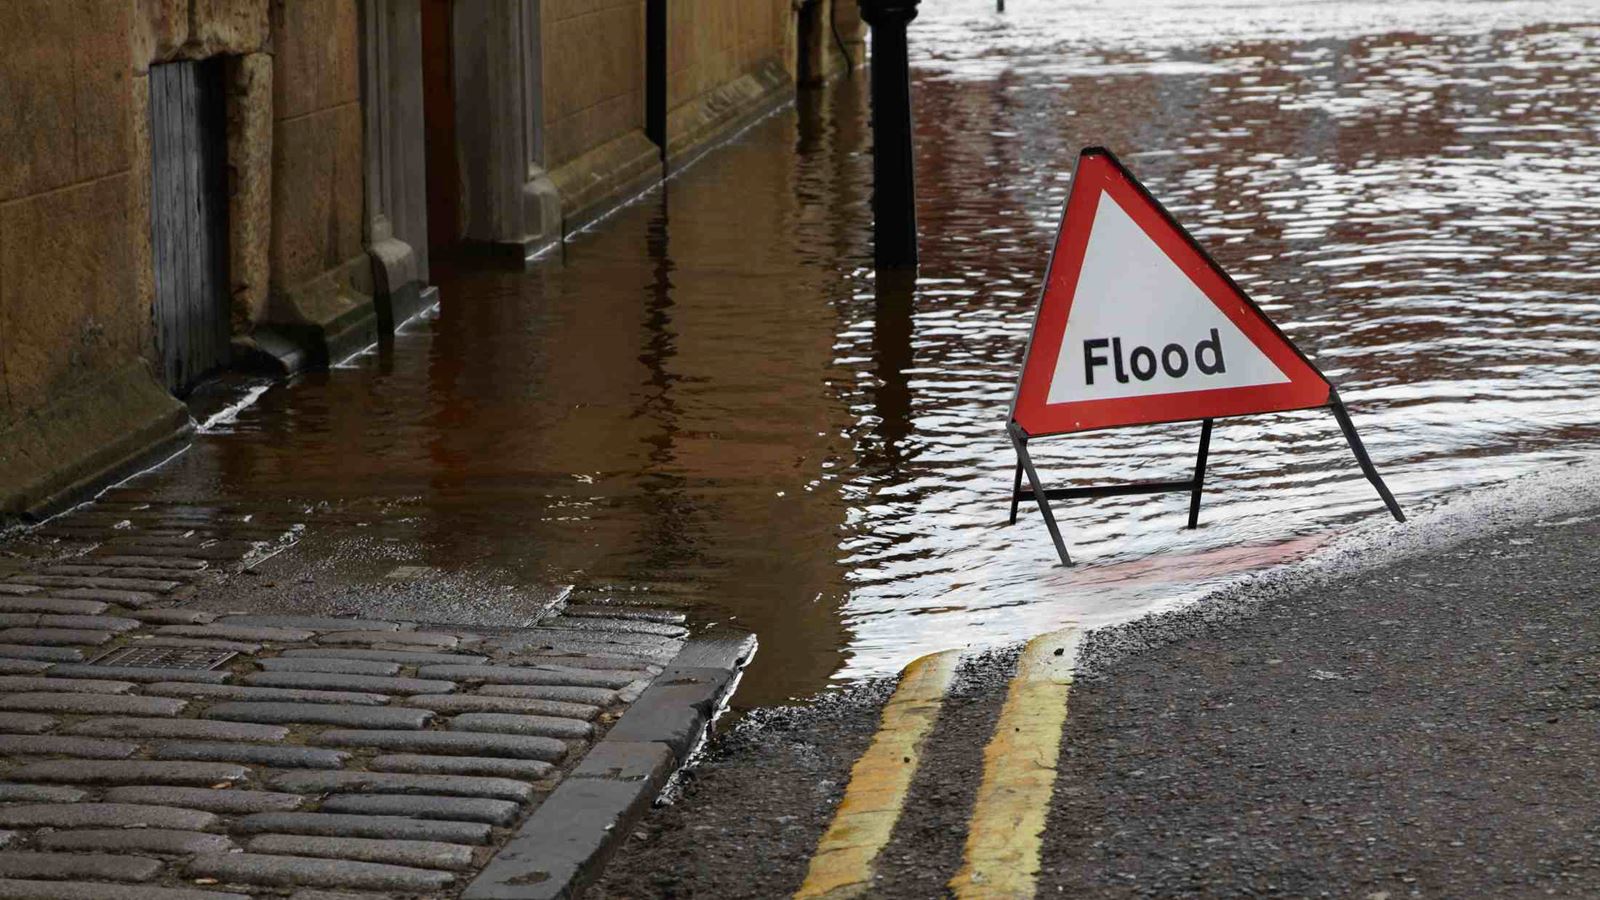 Flood warning sign in a flooded city street